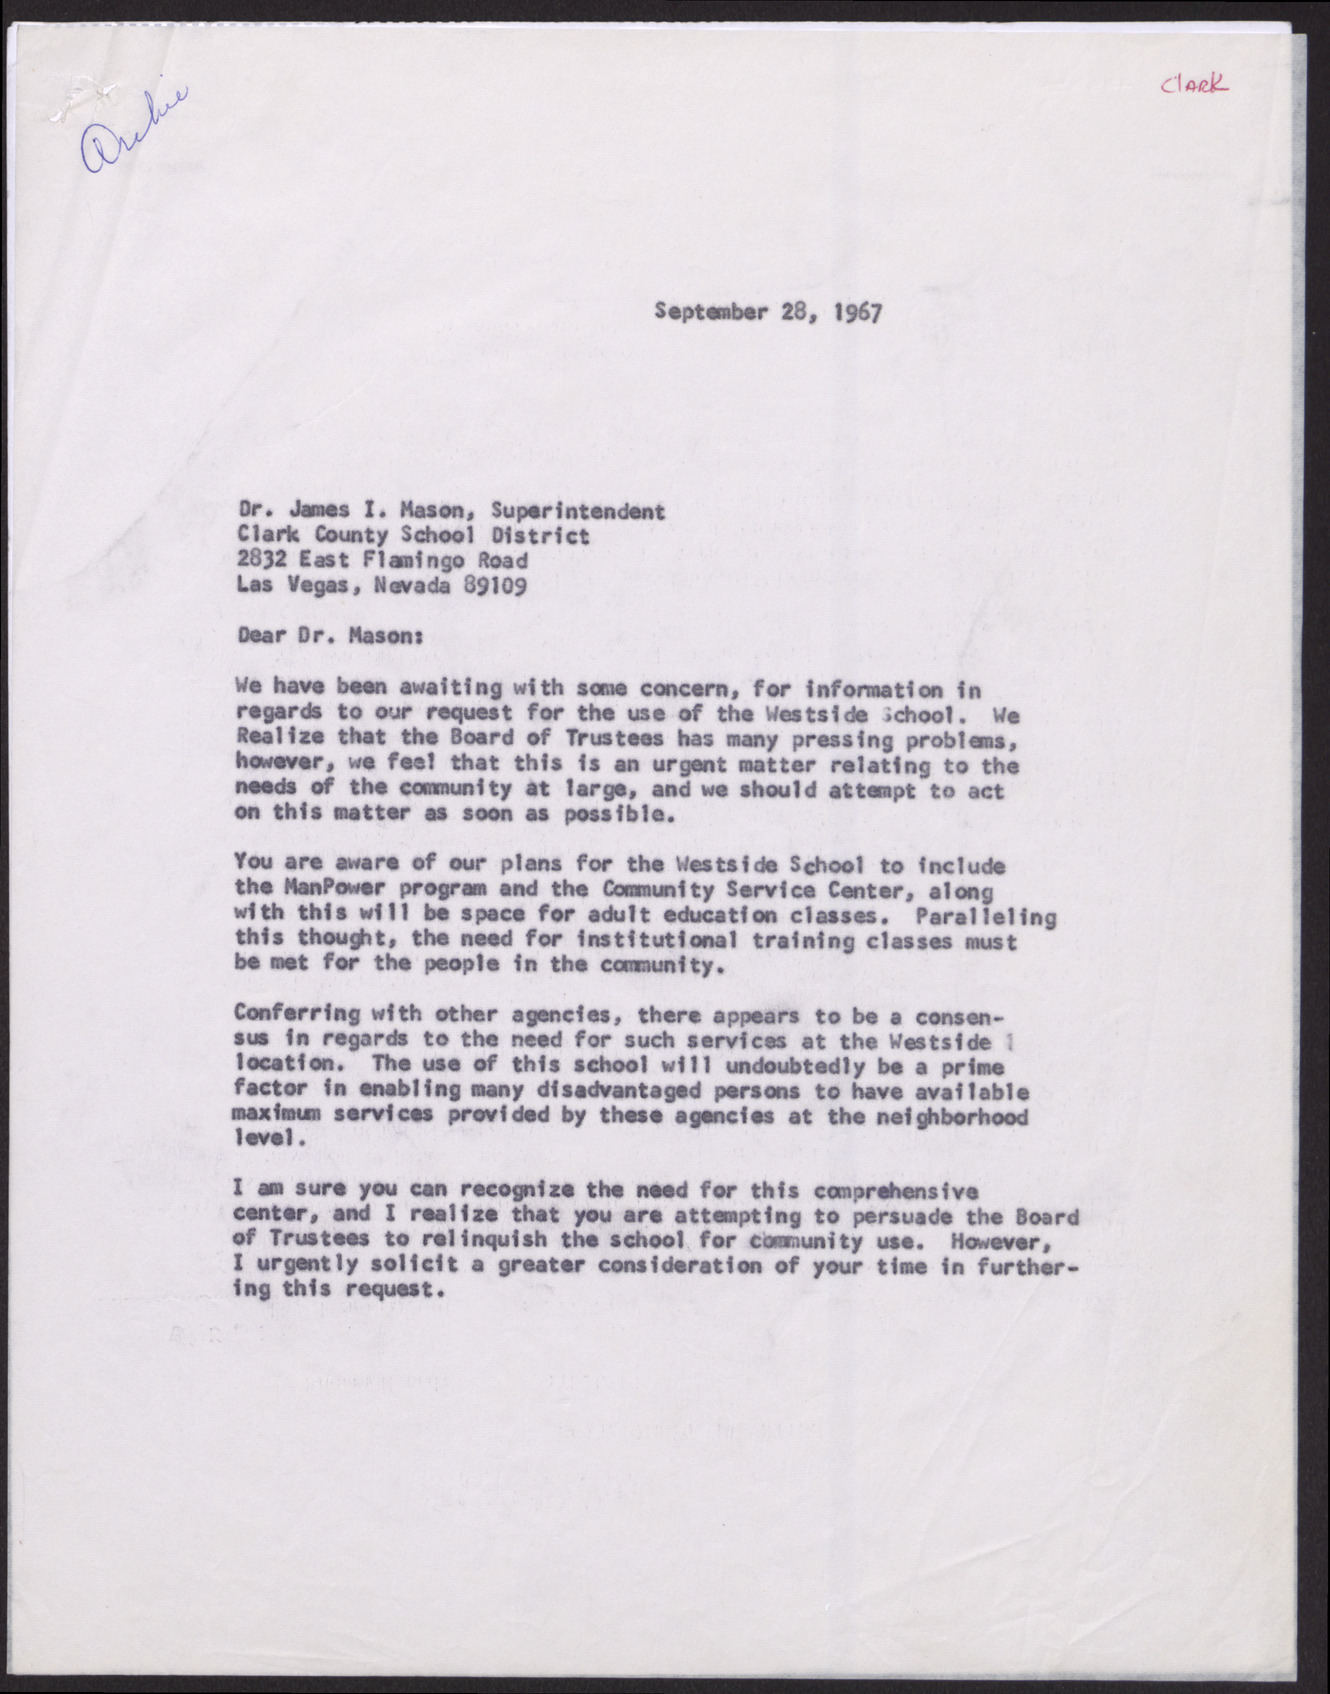 Letter to James I. Mason from George W. Gant (2 pages), September 28, 1967